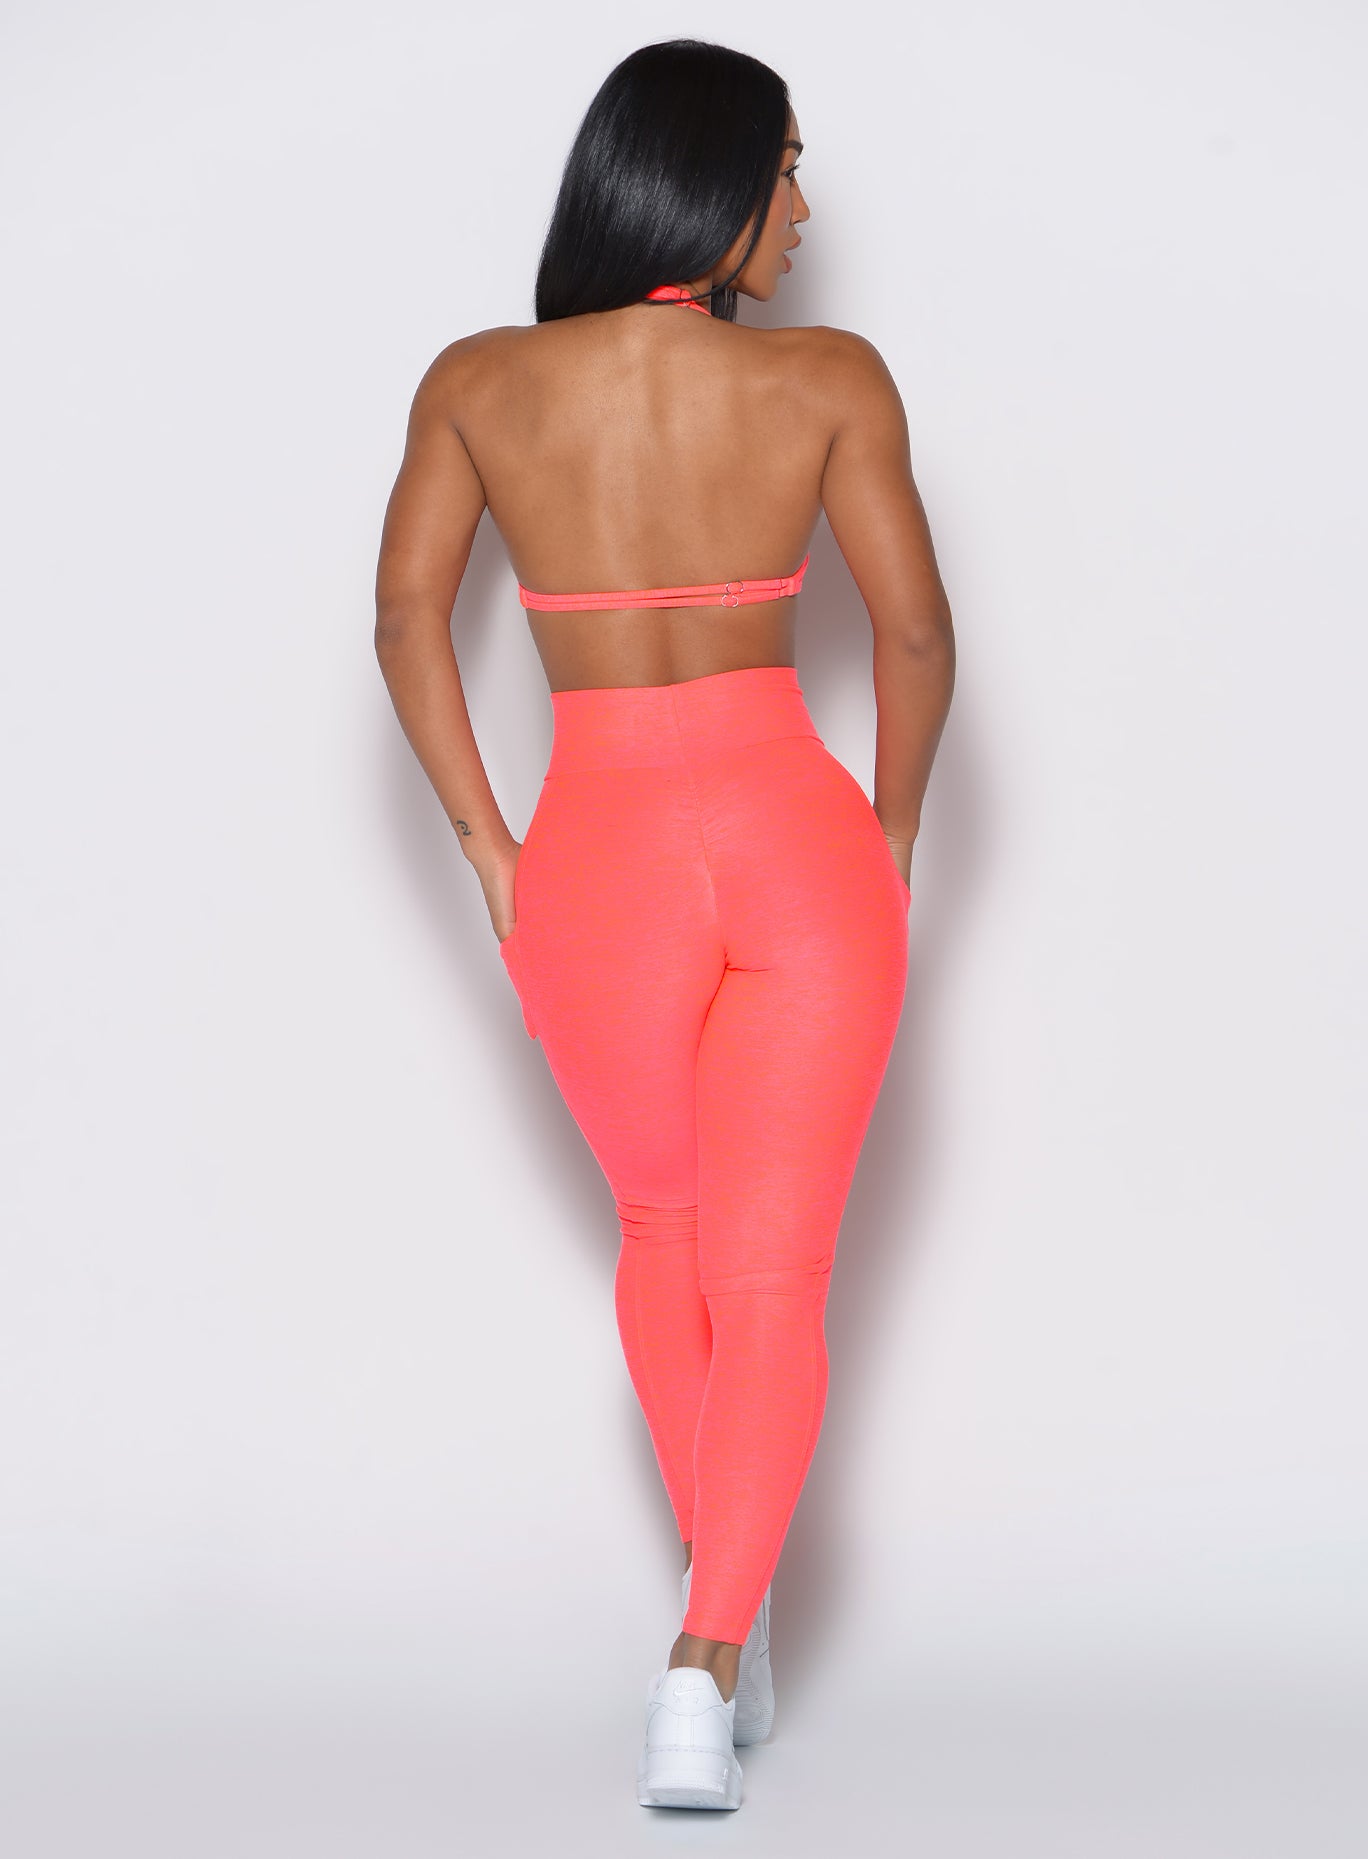 back profile picture of a model facing to her right wearing our curves leggings in Neon Apricot Pink color along with the matching sports bra